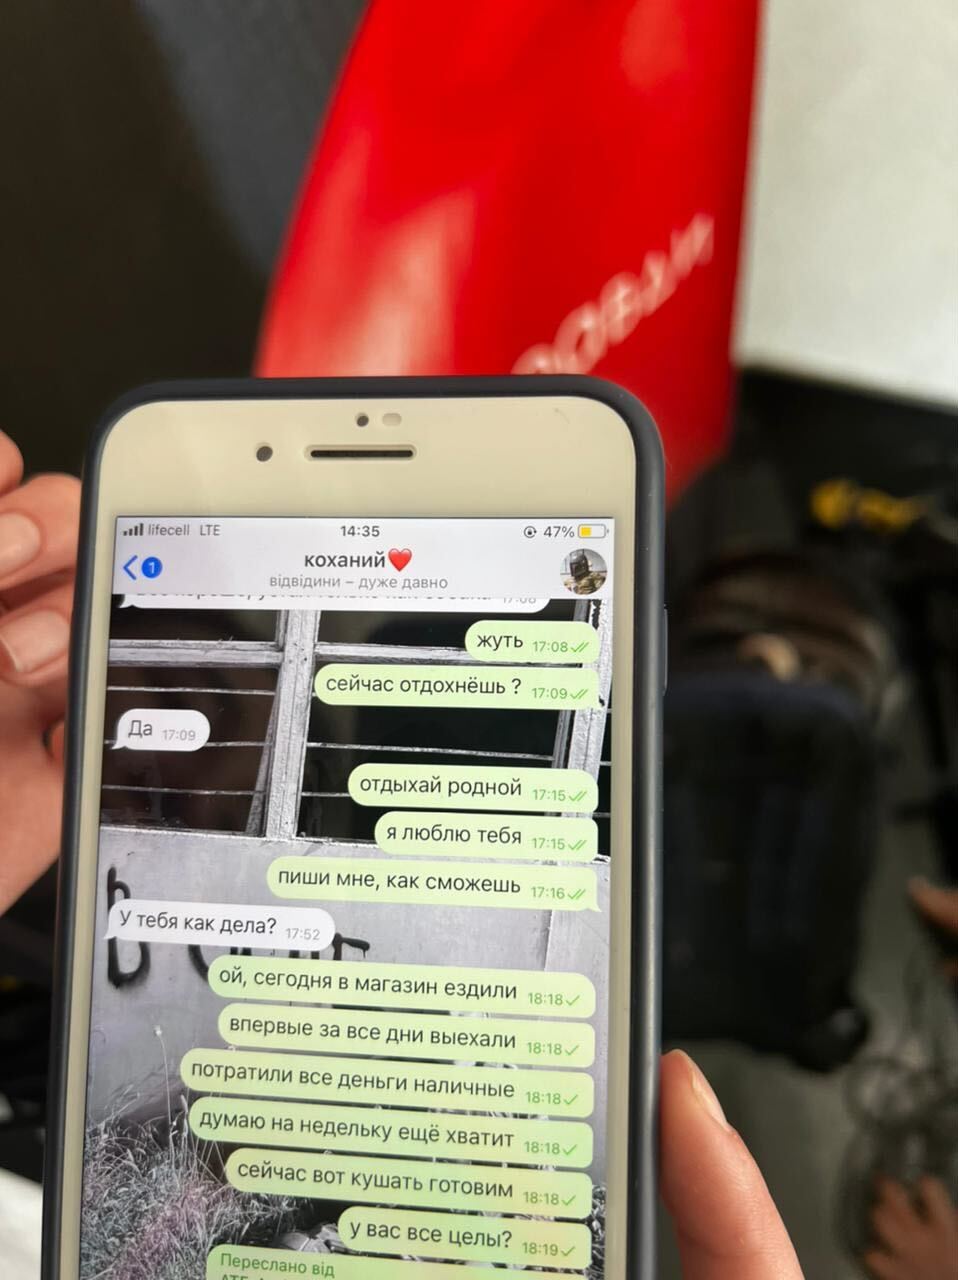 Nastya Bilousova shows a conversation she had with her boyfriend Dmytro Chornyi who was killed at the Azovstal plant in Mariupol, Ukraine.  In the message, Chornyi tells Bilousova that he is resting from fighting and she tells him that she loves him.  She also told him that she went out to buy food for the first time in days.